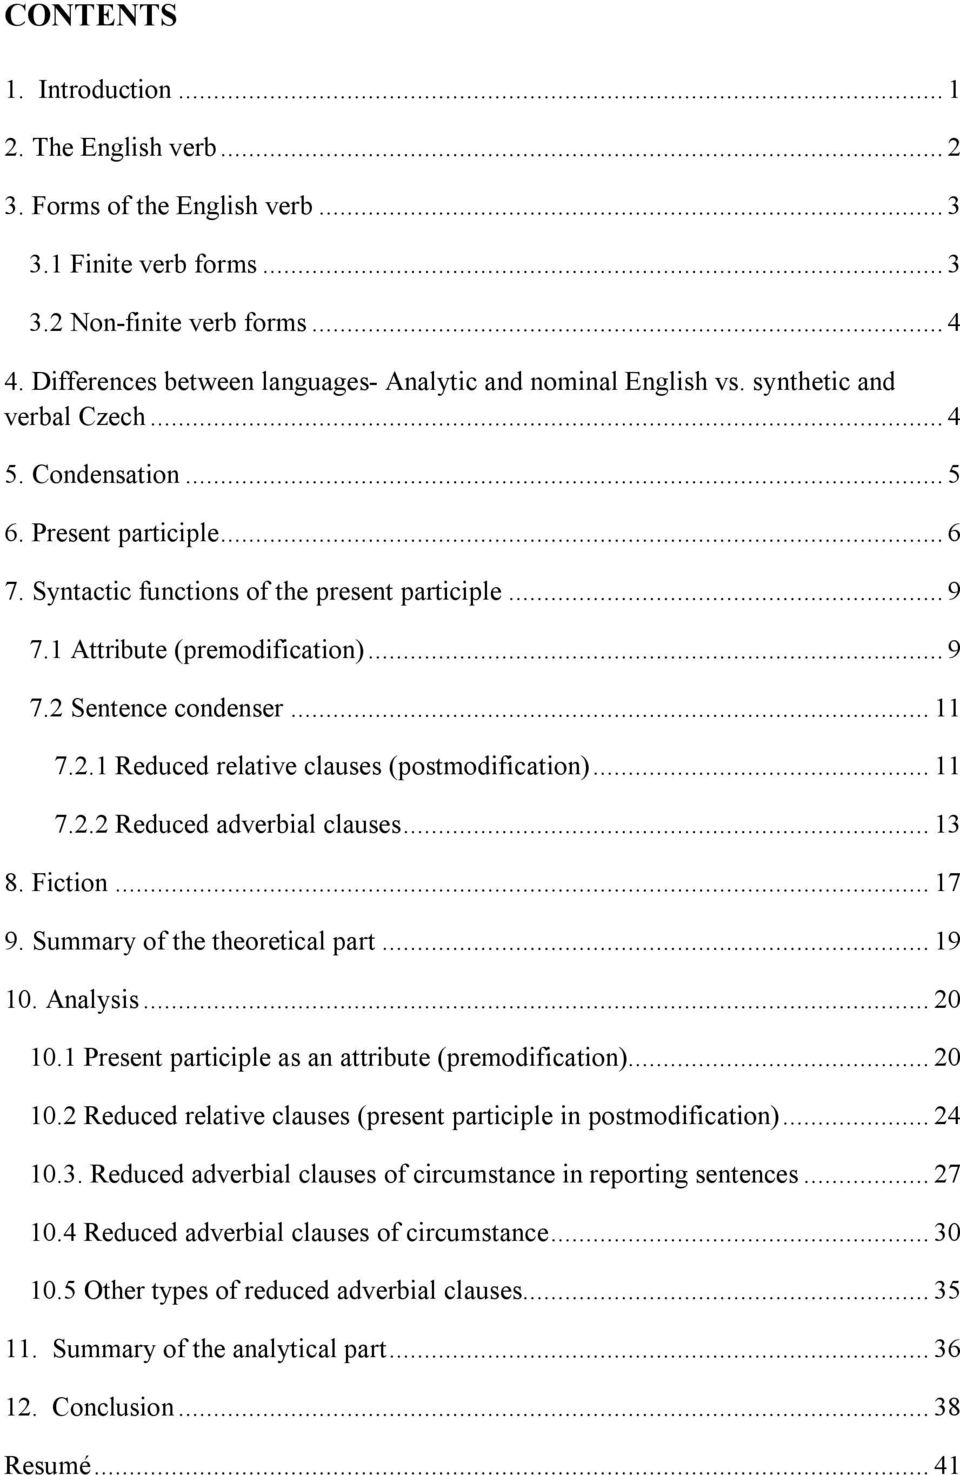 1 Attribute (premodification)... 9 7.2 Sentence condenser... 11 7.2.1 Reduced relative clauses (postmodification)... 11 7.2.2 Reduced adverbial clauses... 13 8. Fiction... 17 9.